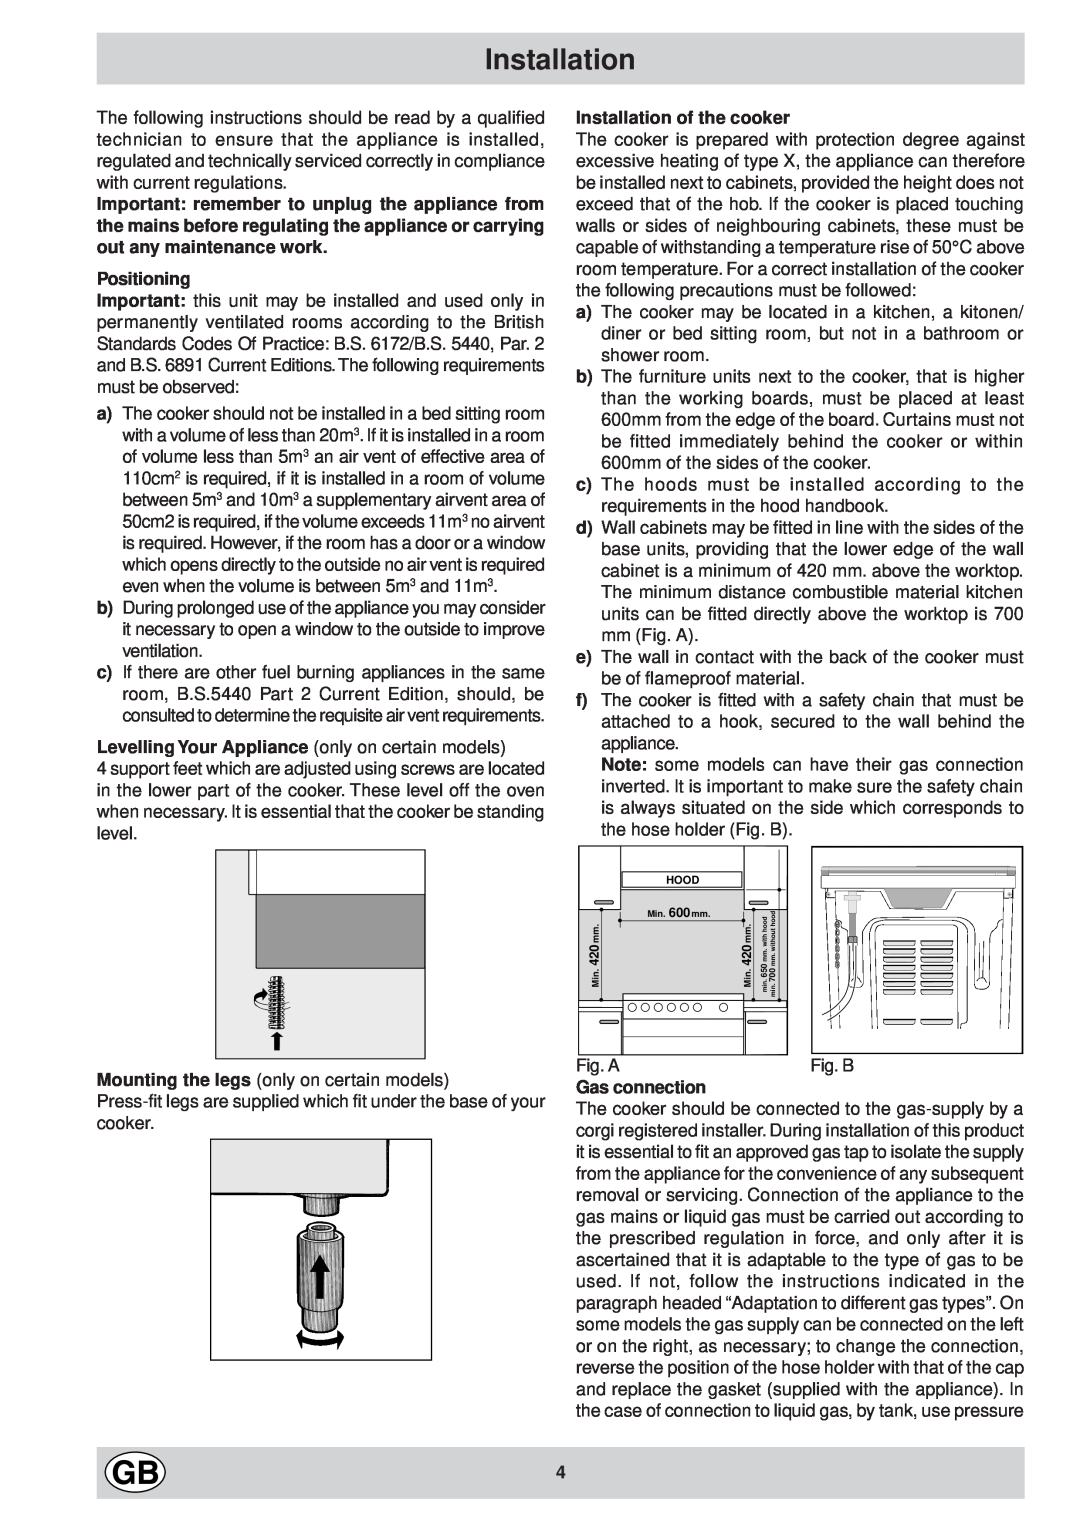 Indesit K6G32/G manual Positioning, Levelling Your Appliance only on certain models, Installation of the cooker 